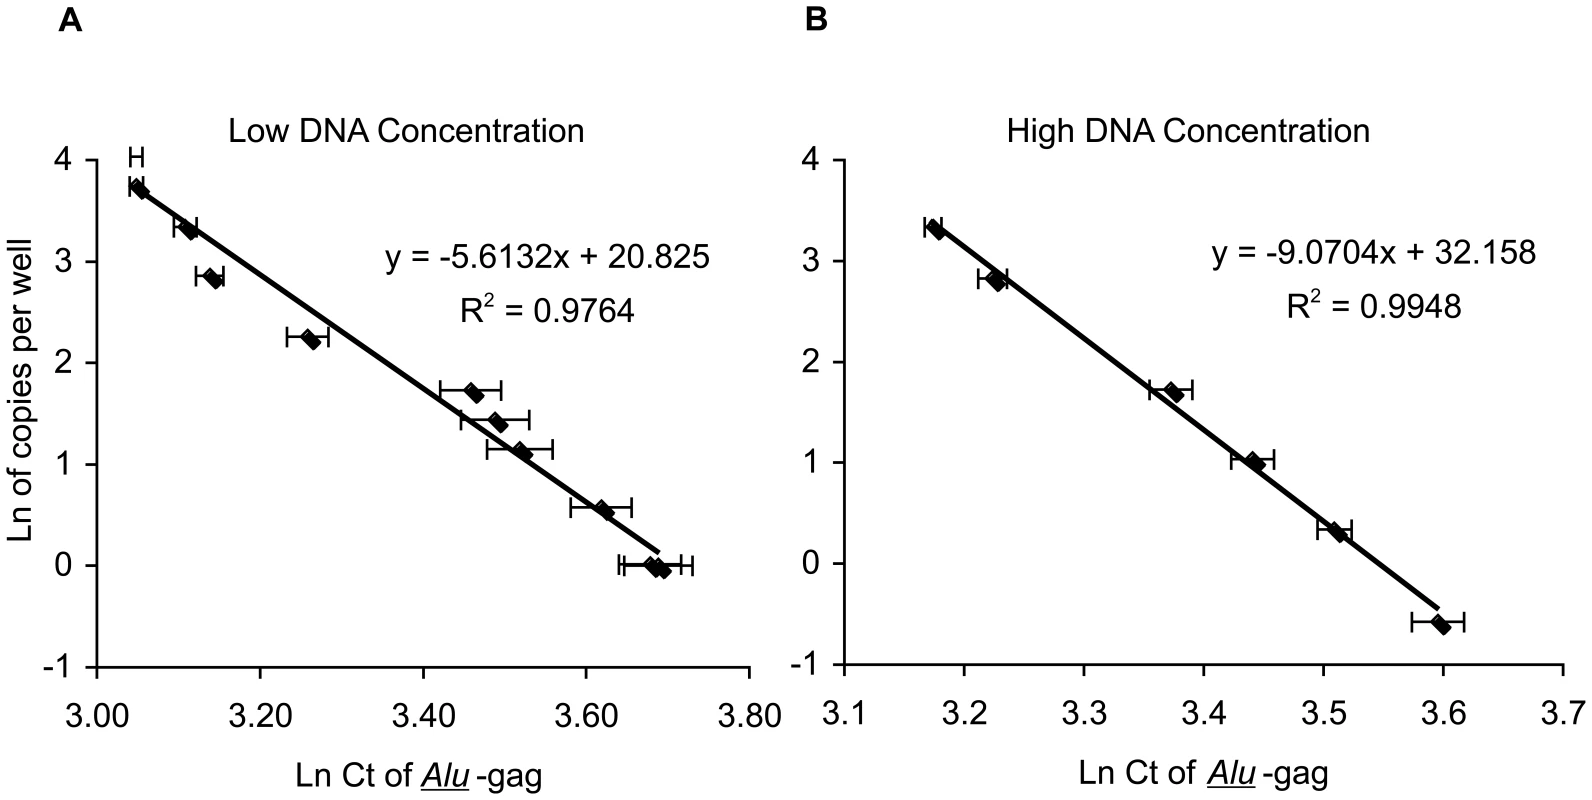 Linear correlation between Ln (Ct of <i>Alu</i>-<i>gag</i>) and Ln (HIV DNA copies per well) at low and high DNA concentrations.